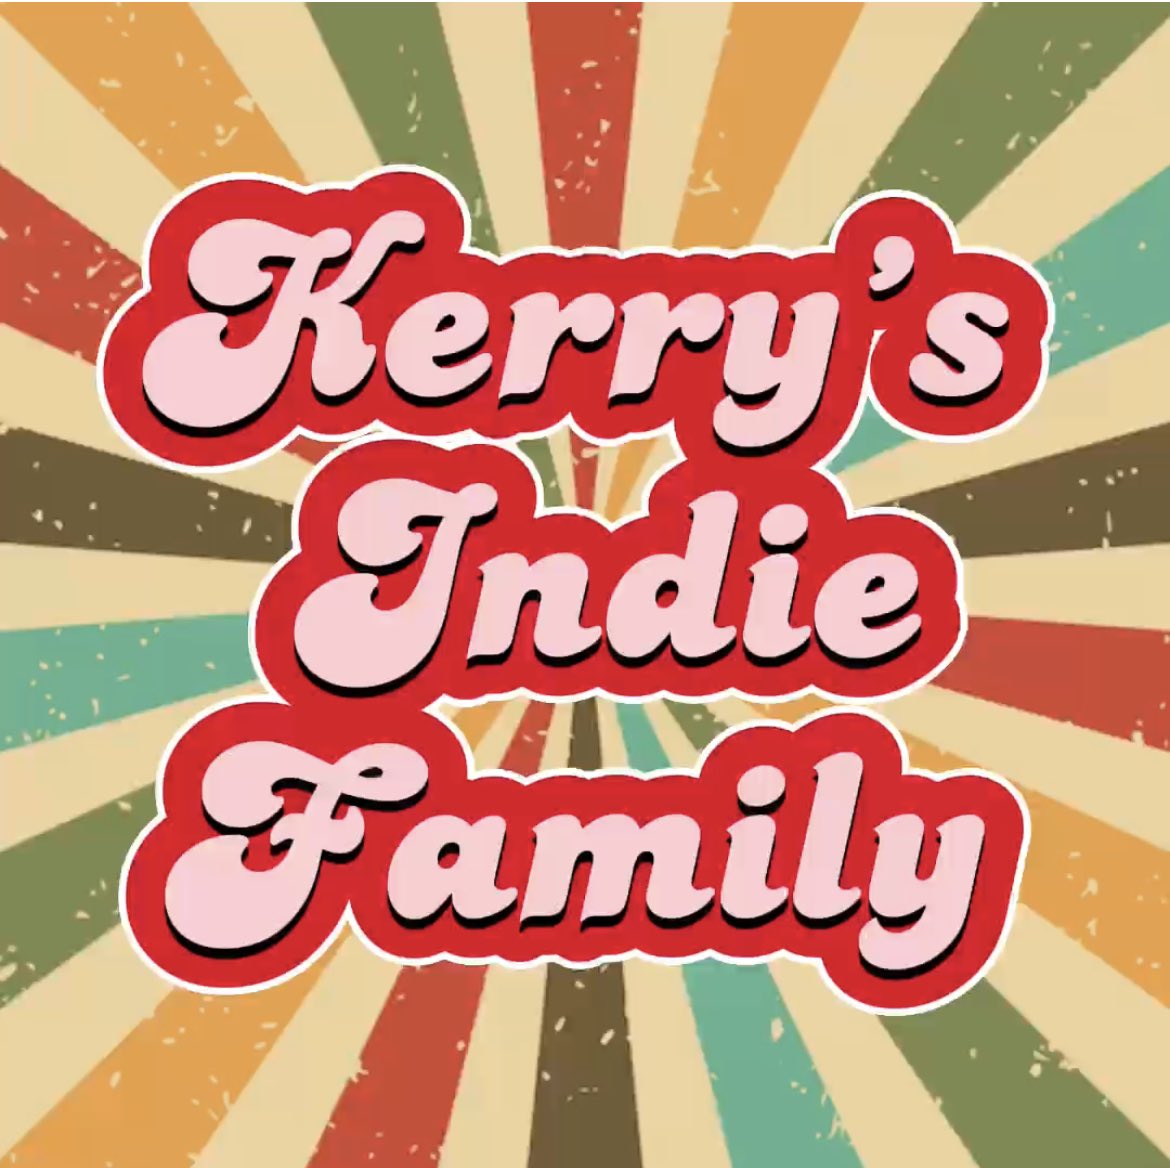 Hey guys! 🍒🍒🍒 My “KERRY’s indie family” #playlist has been filled with new songs by great #indiemusicians open.spotify.com/playlist/1uOiL… 🤗🤗🤗🤗🤗 @faceless_rox @The_Lou_Baxter @lestatgothchat @CC_performs @Hogchoker_band @JacobsFall1 @stri_junior @DymondBright